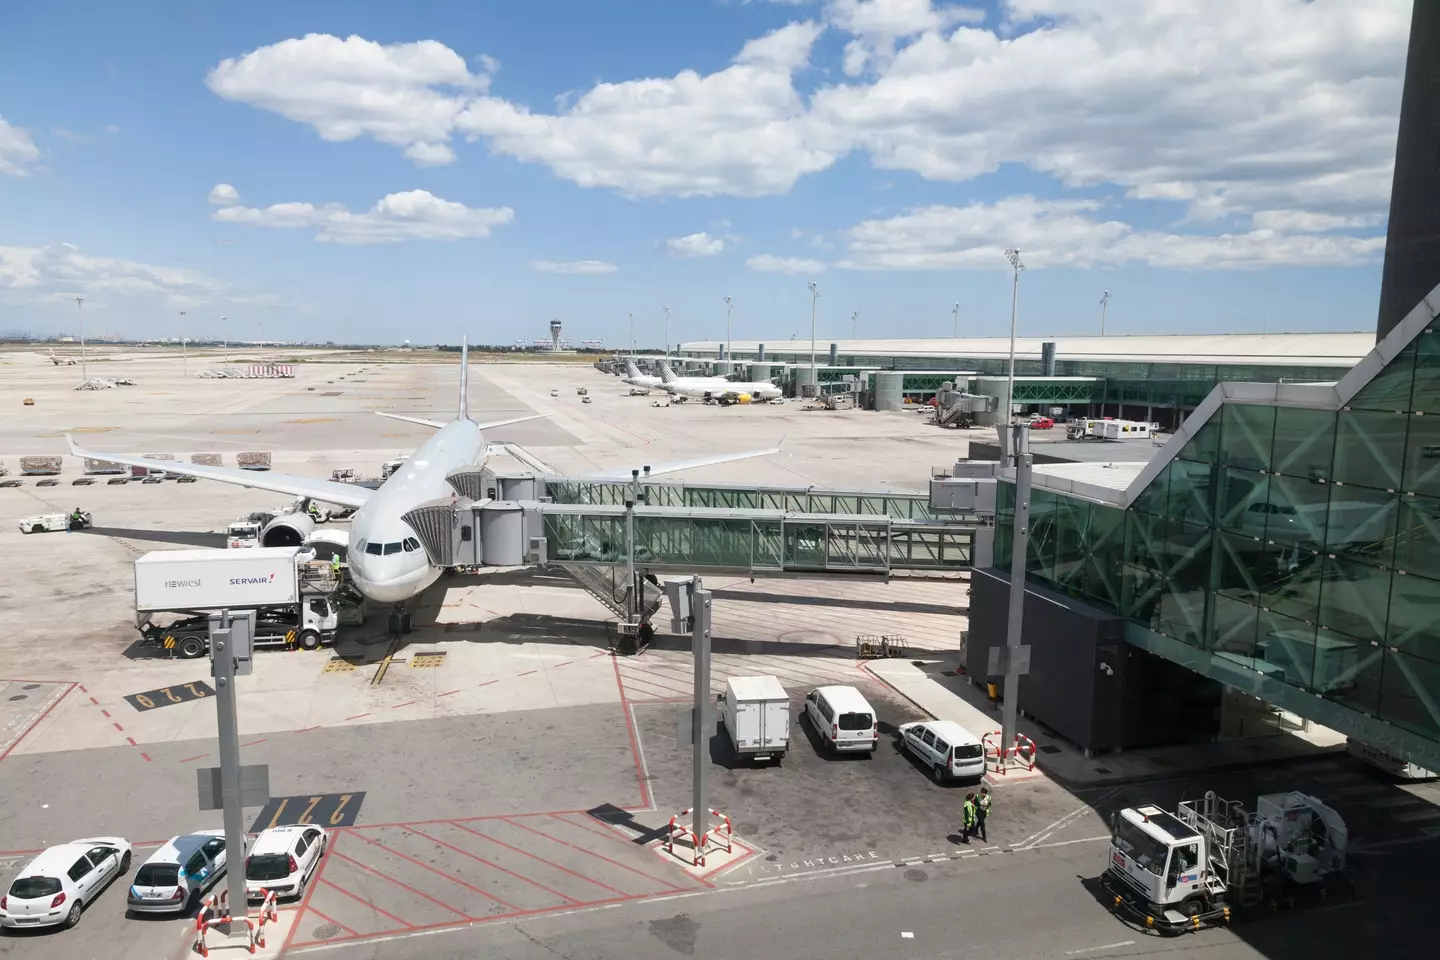 Flights have been grounded at Barcelona airport.